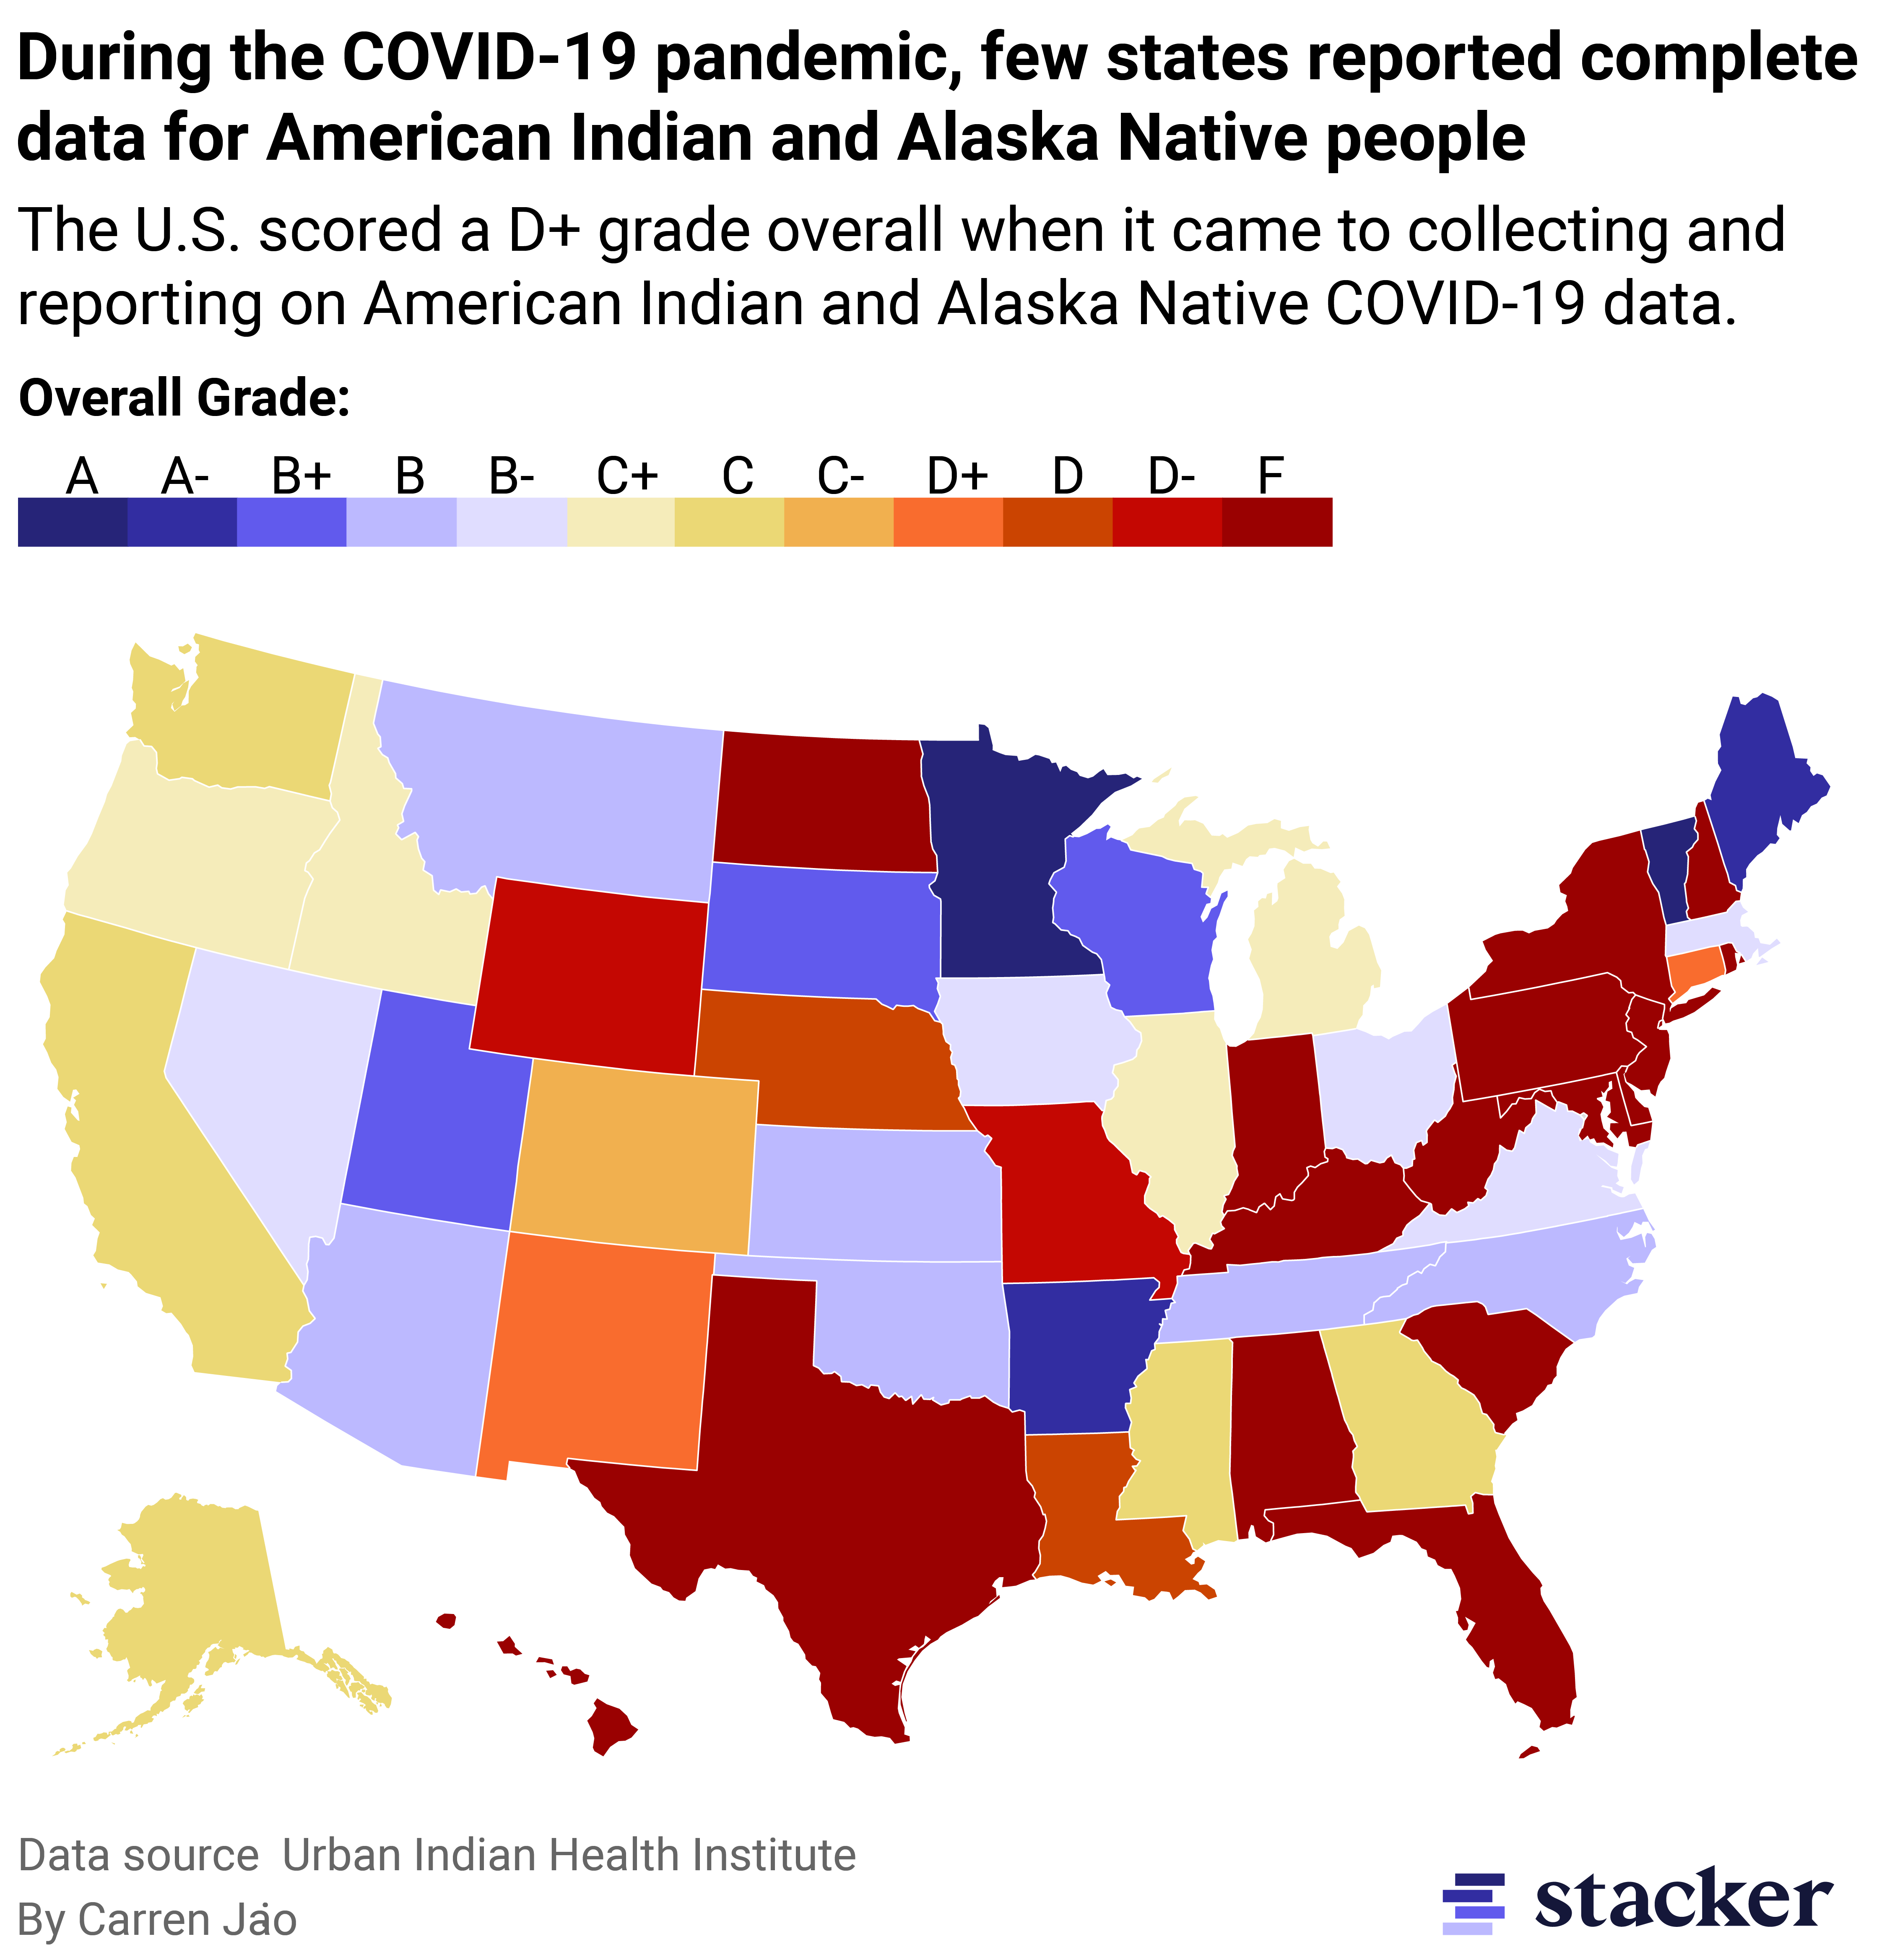 Map showing that during the COVID-19 pandemic, few states reported complete data for American Indian and Alaska Native people. The U.S. scored a D+ grade overall when it came to collecting and reporting on American Indian and Alaska Native COVID-19 data. 